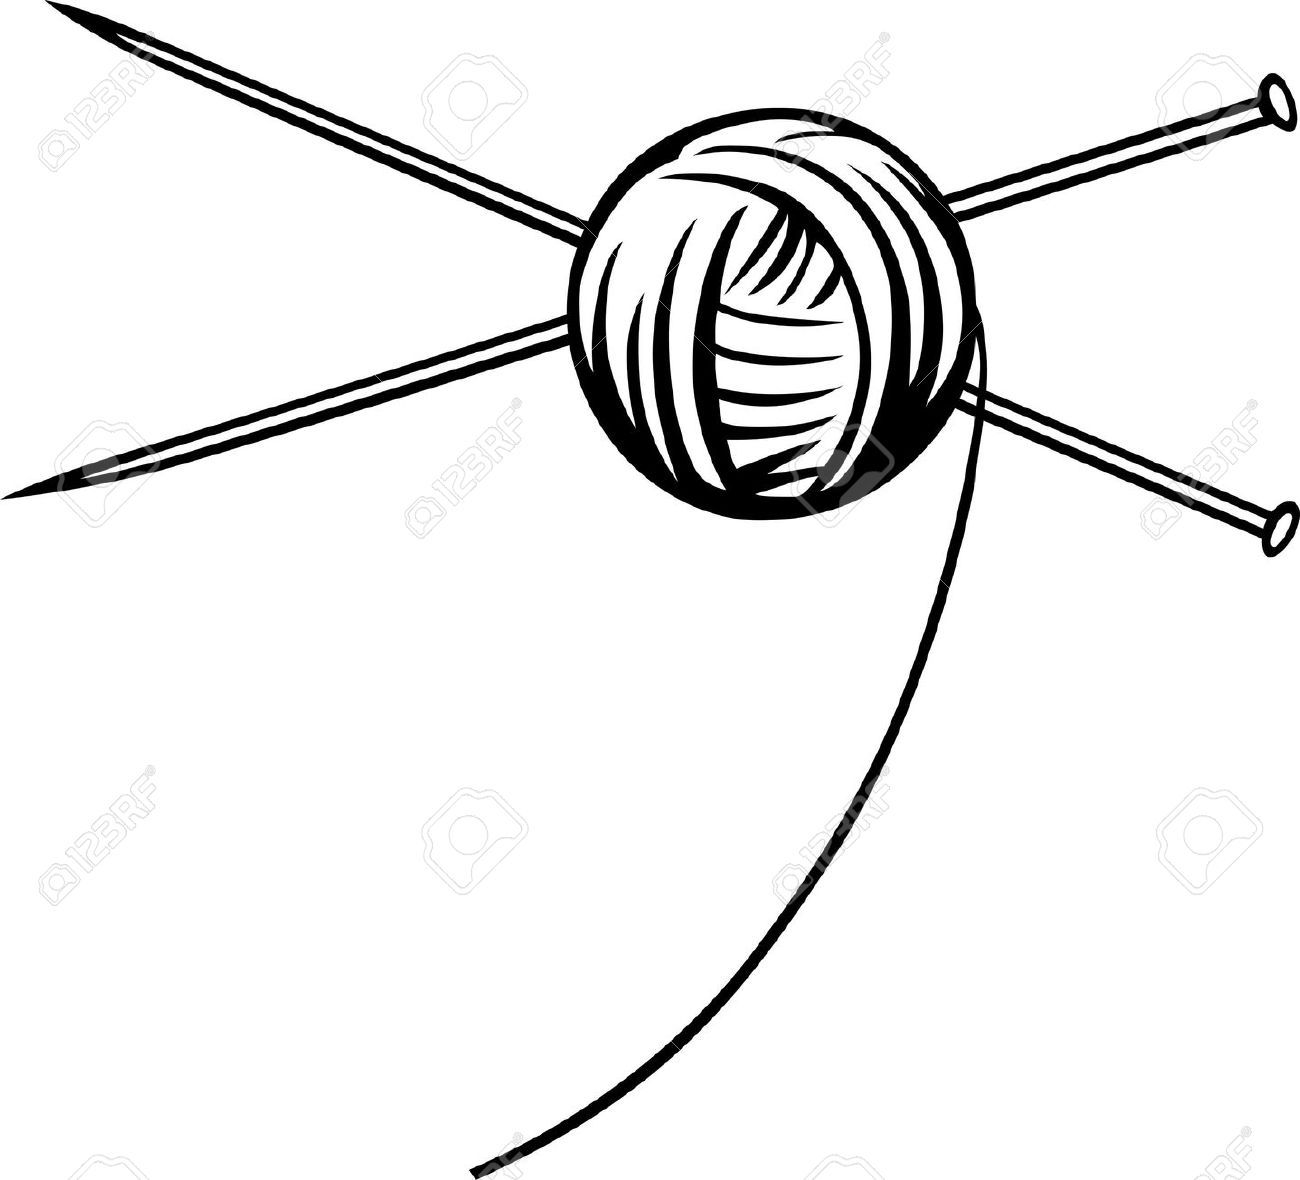 knitting clipart knit